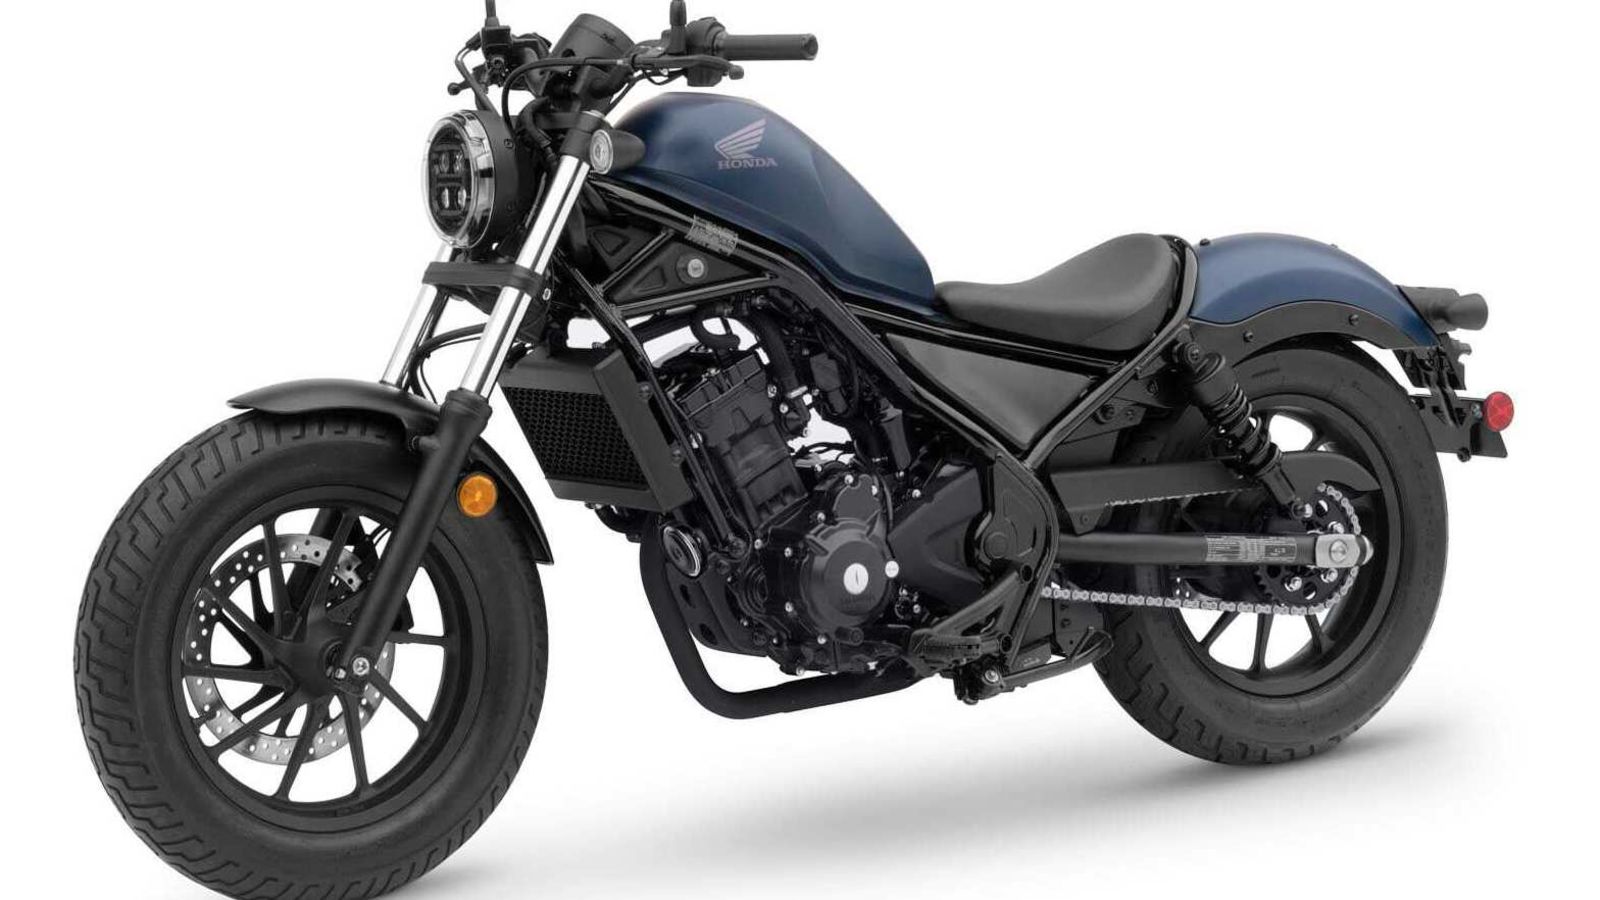 Honda H'Ness Cruiser to launch in India on Wednesday: Price expectation ...